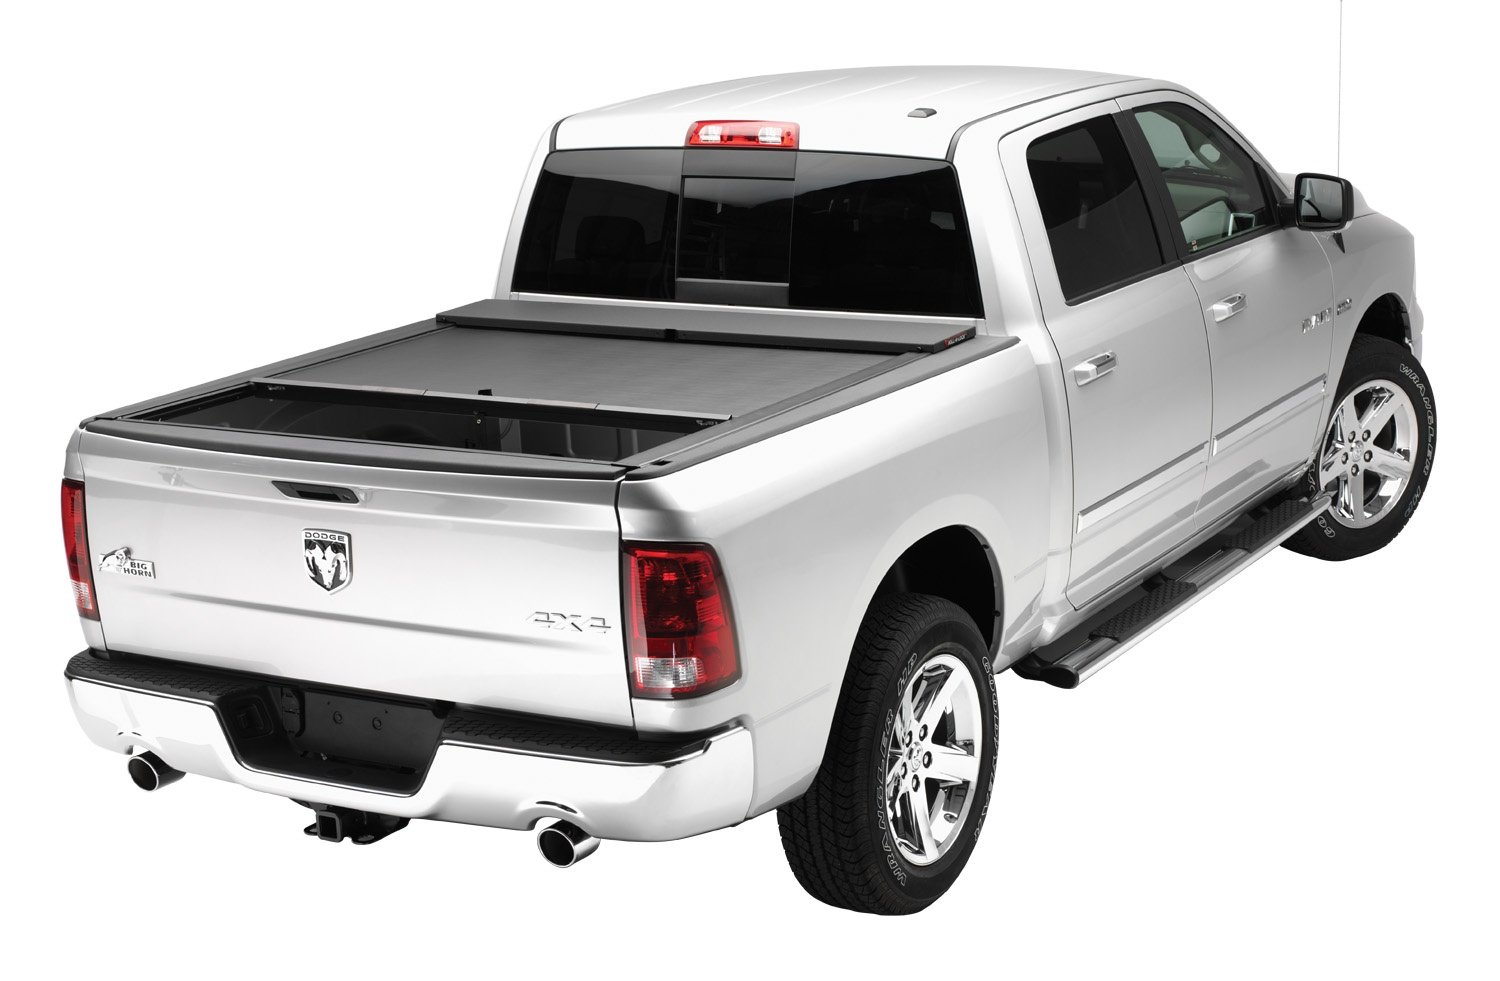 LG449M M-Series Locking Retractable Truck Bed Cover for Select Dodge Ram 1500, Ram 2500/3500 [8 ft. Bed]